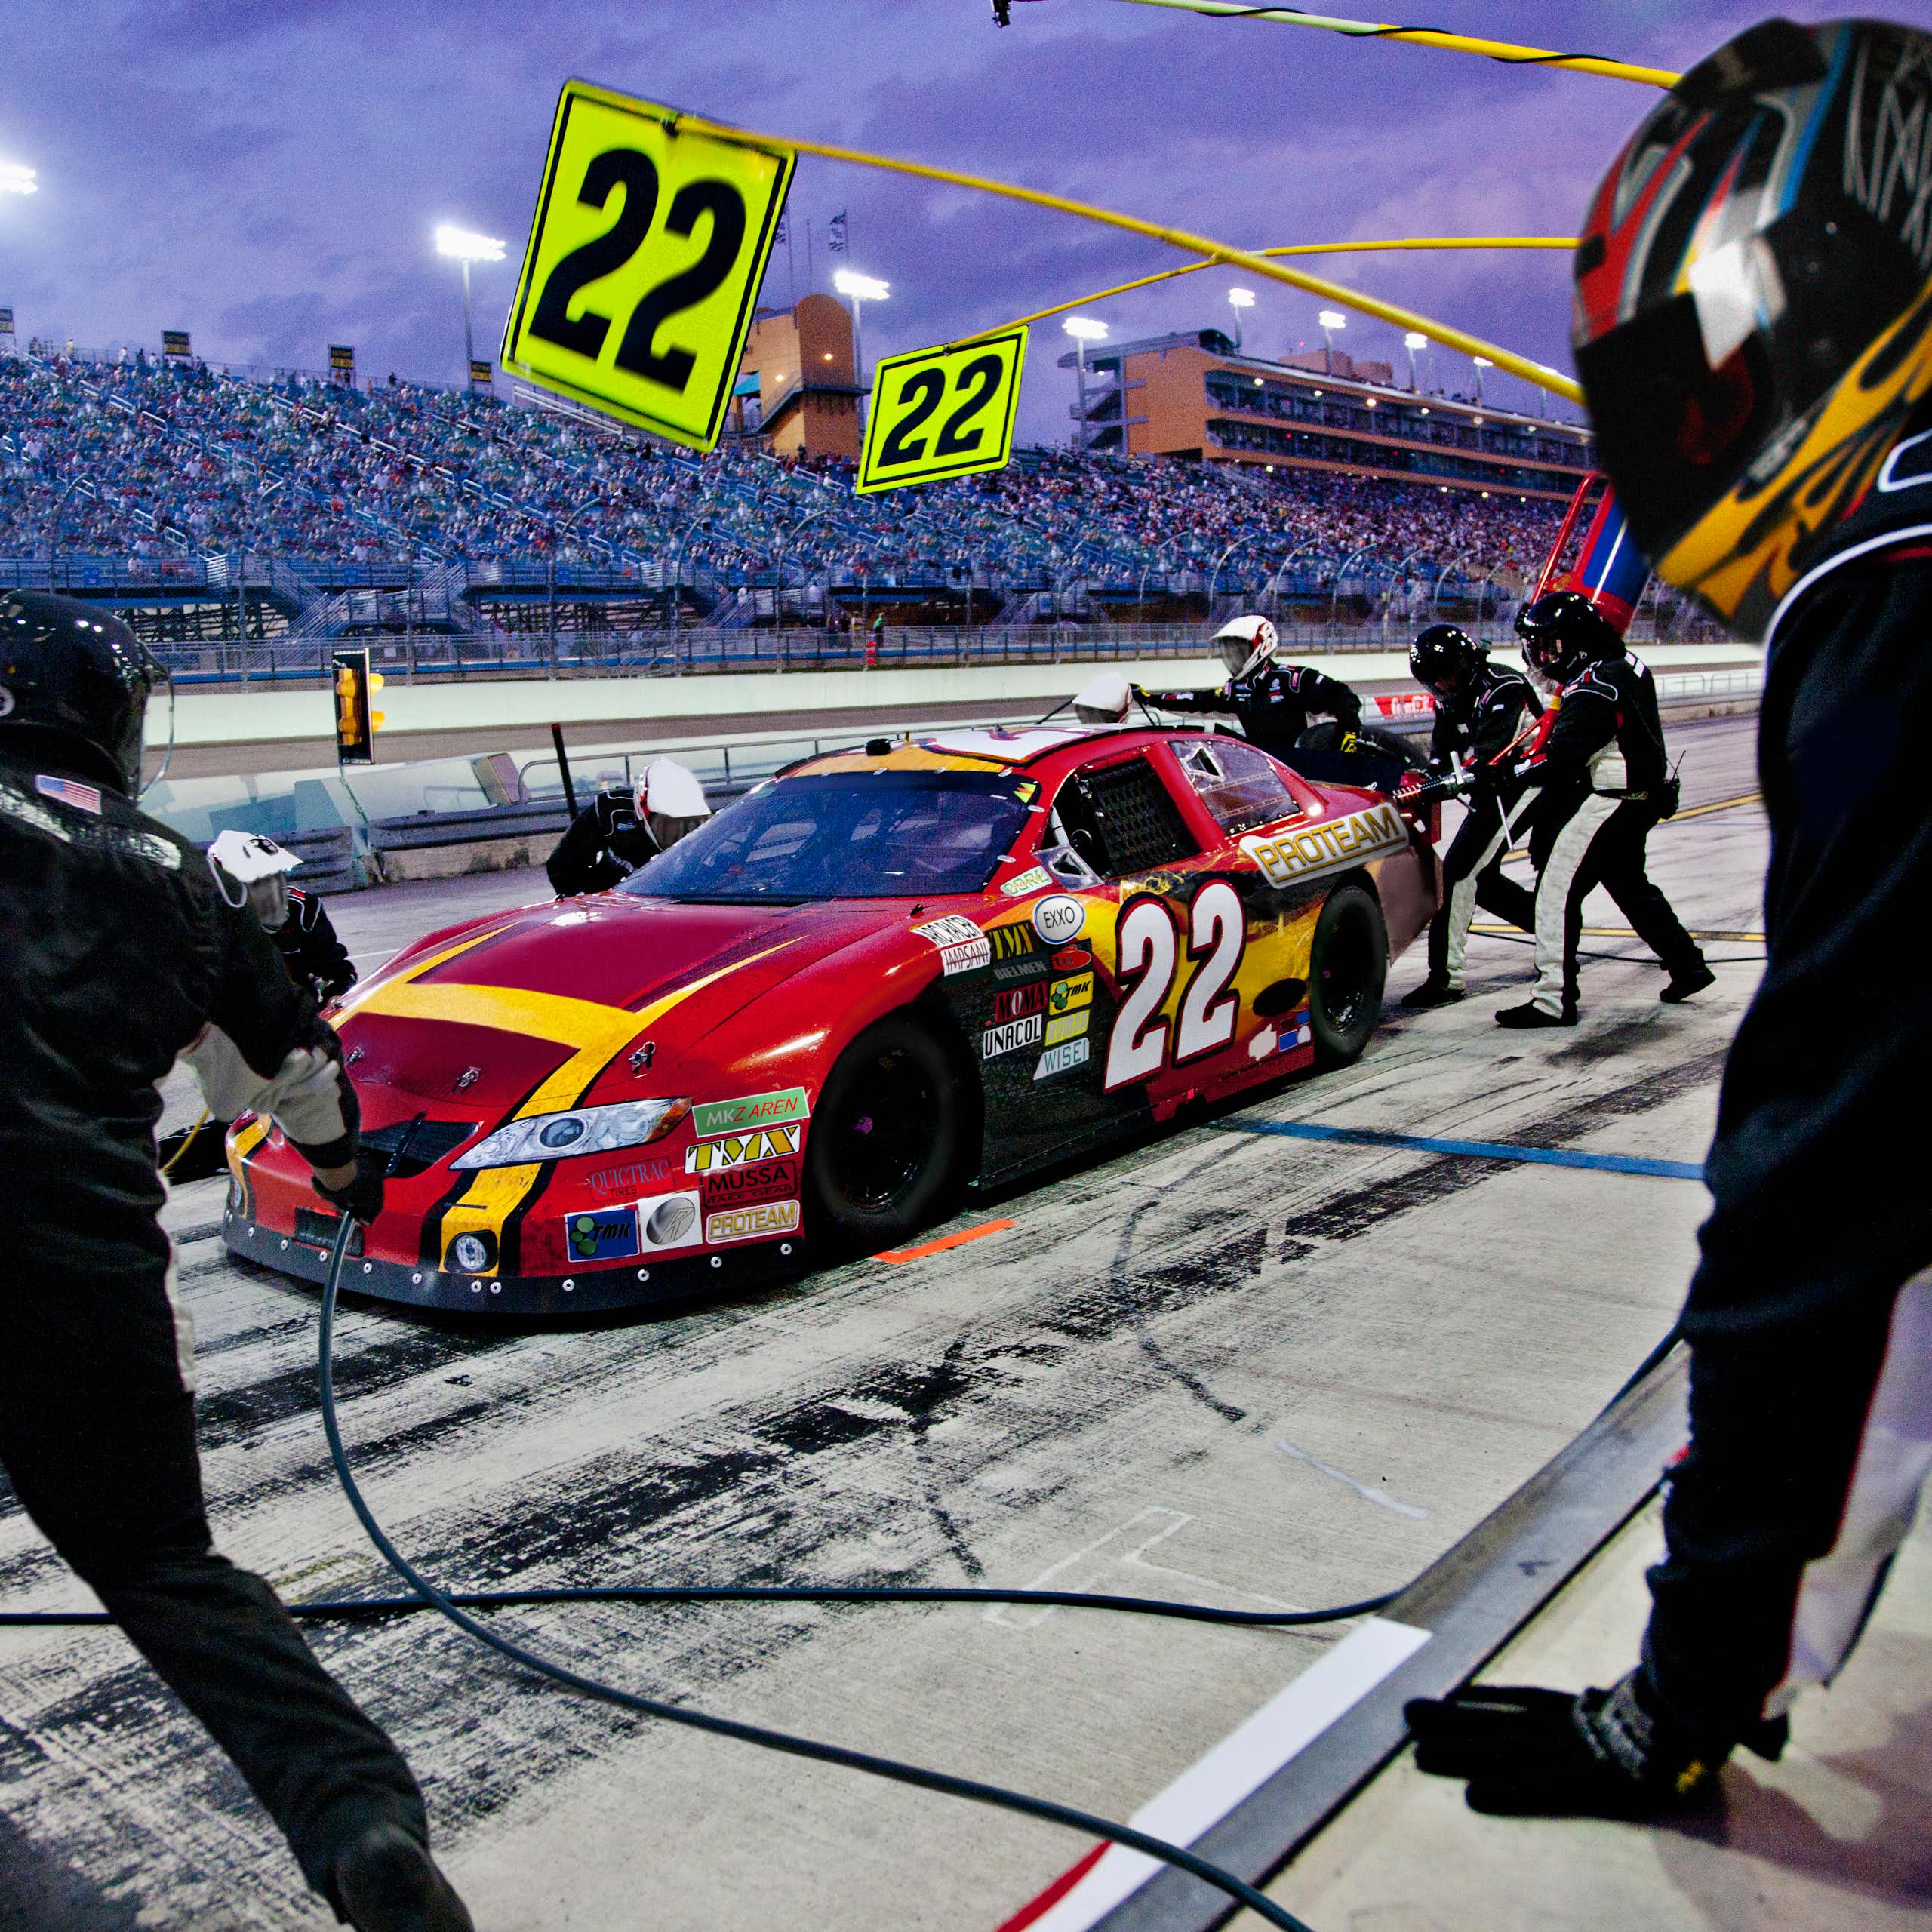 A pit crew works on a car at a racetrack.